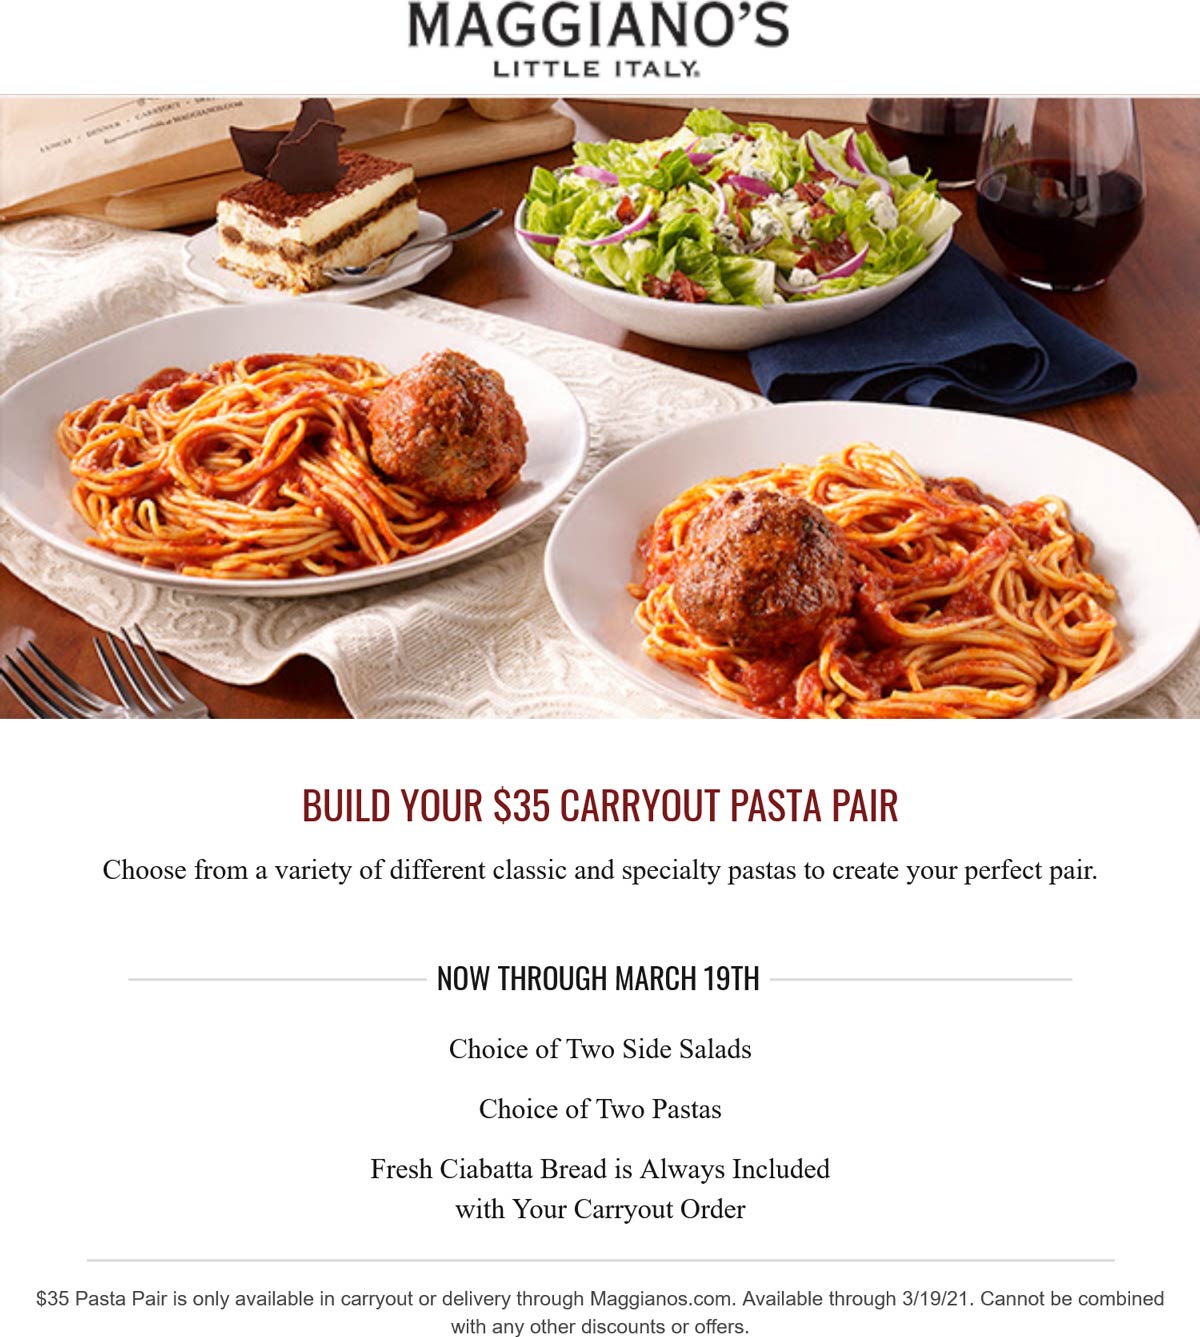 Maggianos Little Italy restaurants Coupon  2 pasta entrees + 2 side salads + bread = $35 carryout at Maggianos Little Italy #maggianoslittleitaly 